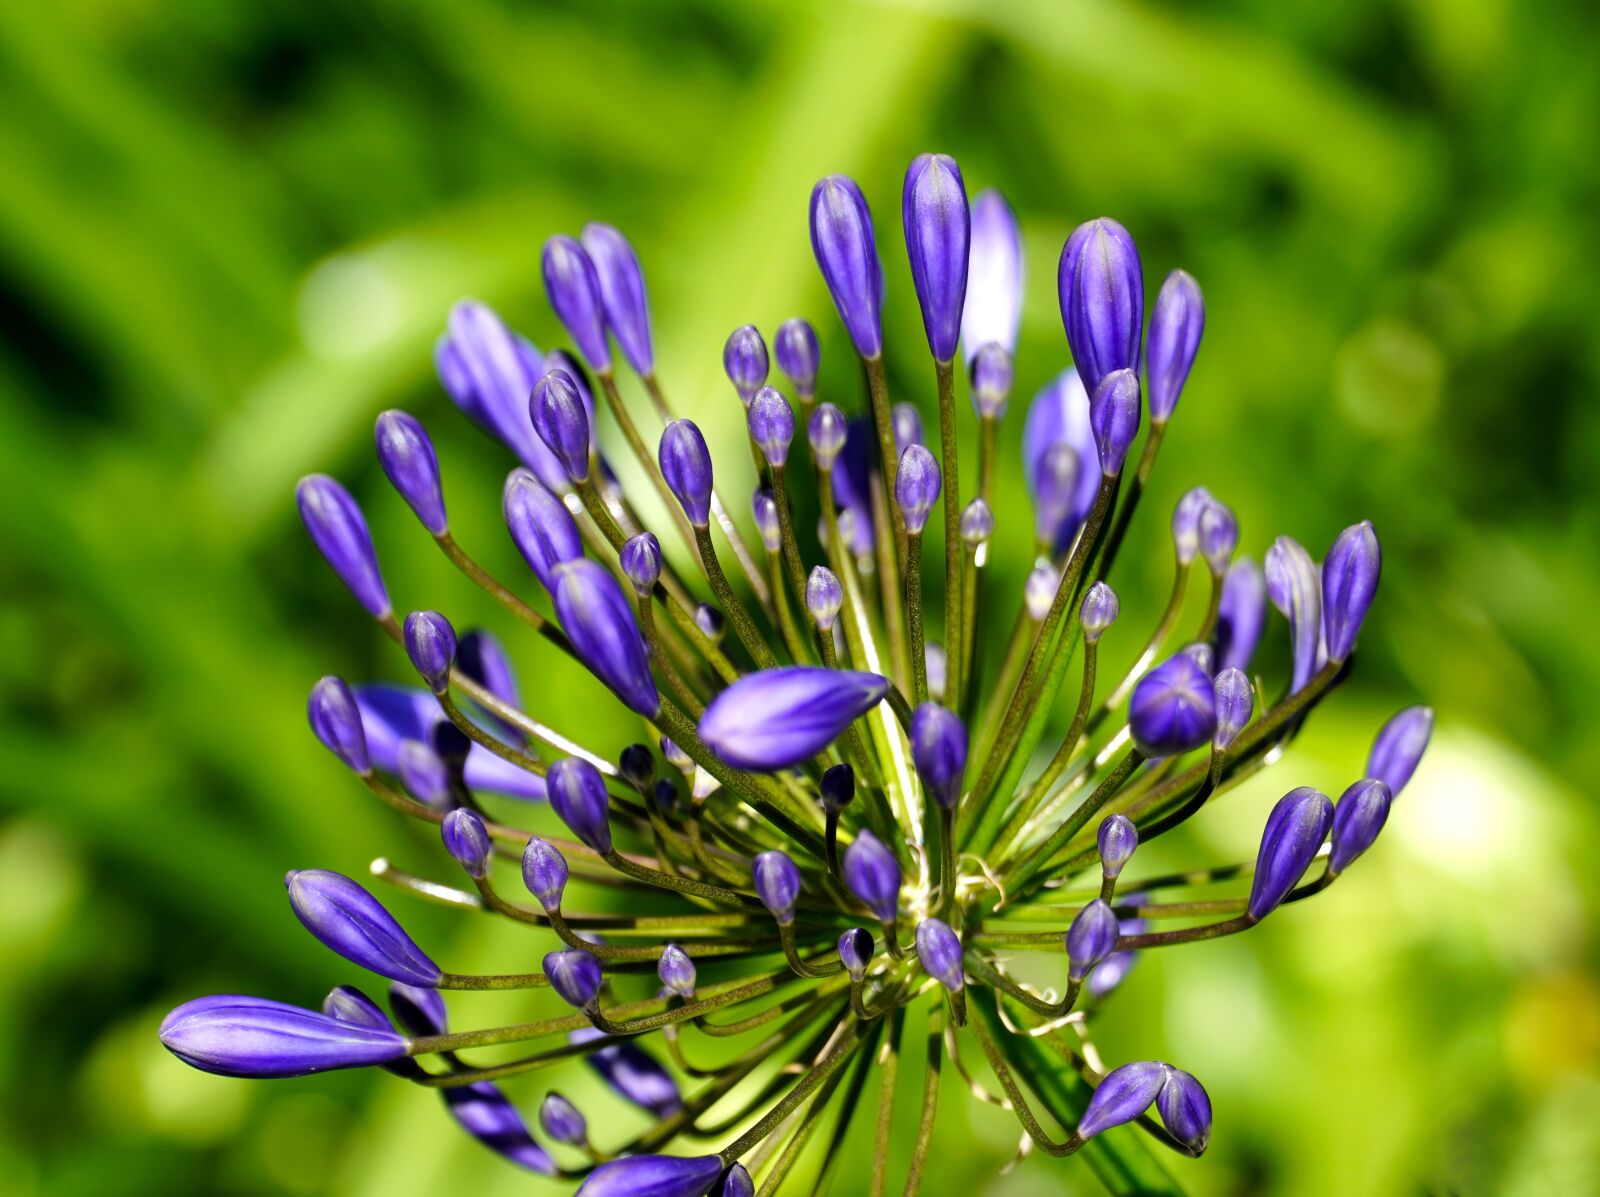 Sony a6400 sample photo. Flower, agapanthus, blossom photography